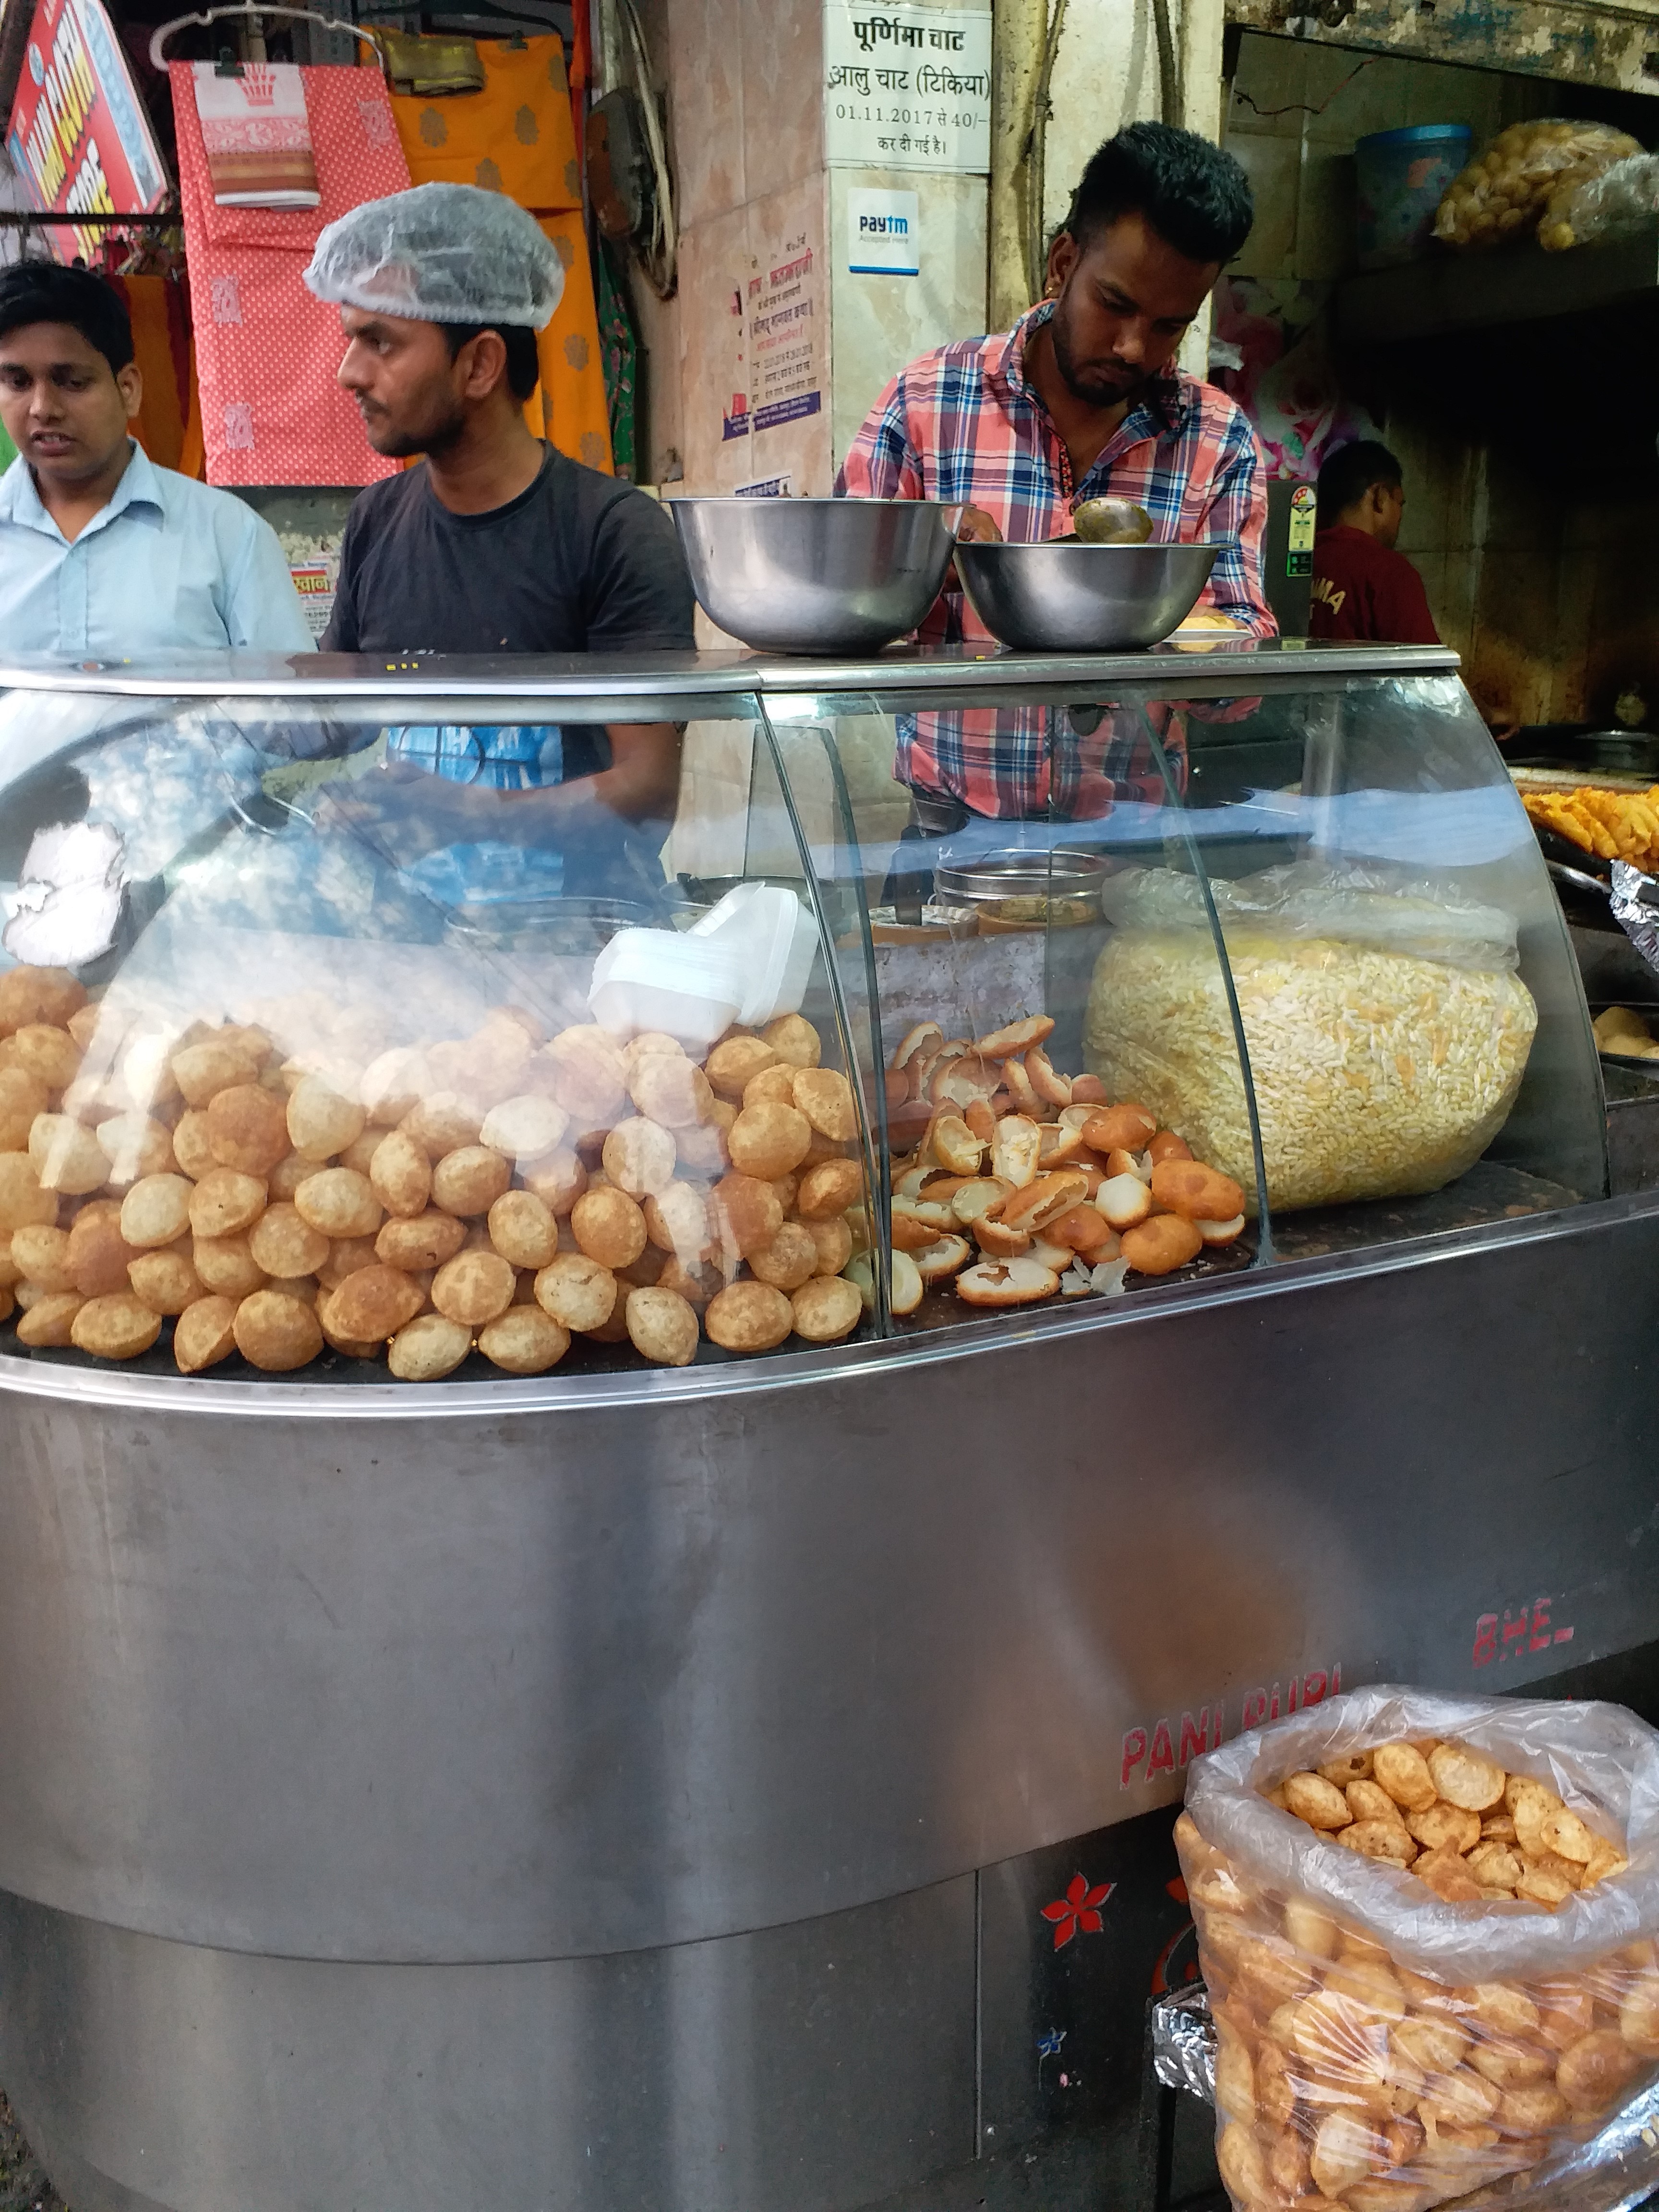 Craving Pani Puri? Here's a list of some places to go to